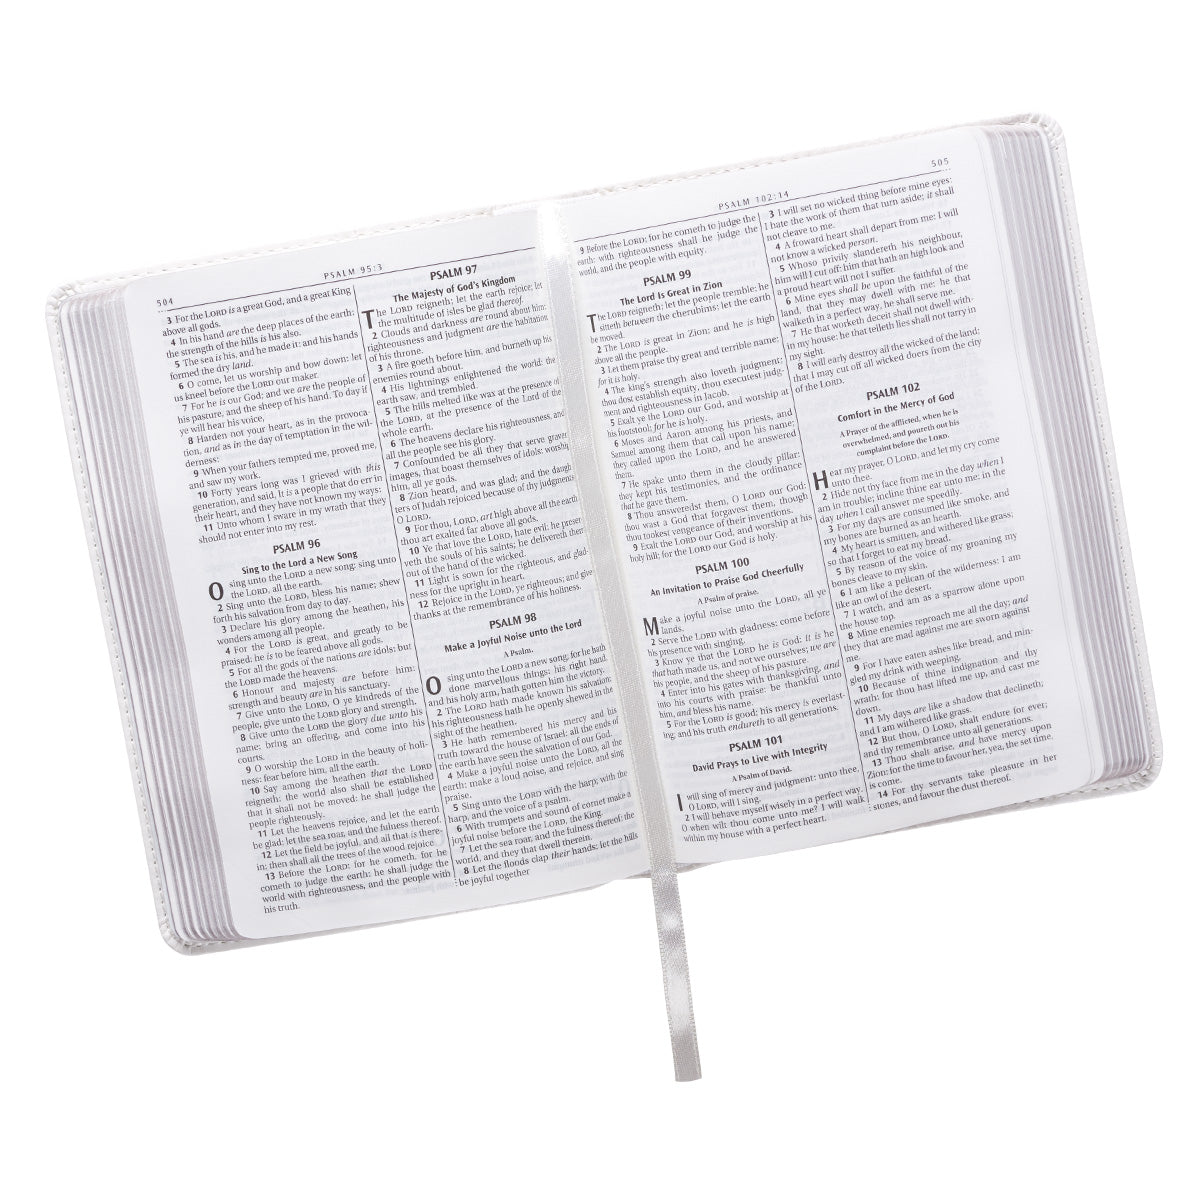 Image of White Faux Leather Compact King James Version Bible other